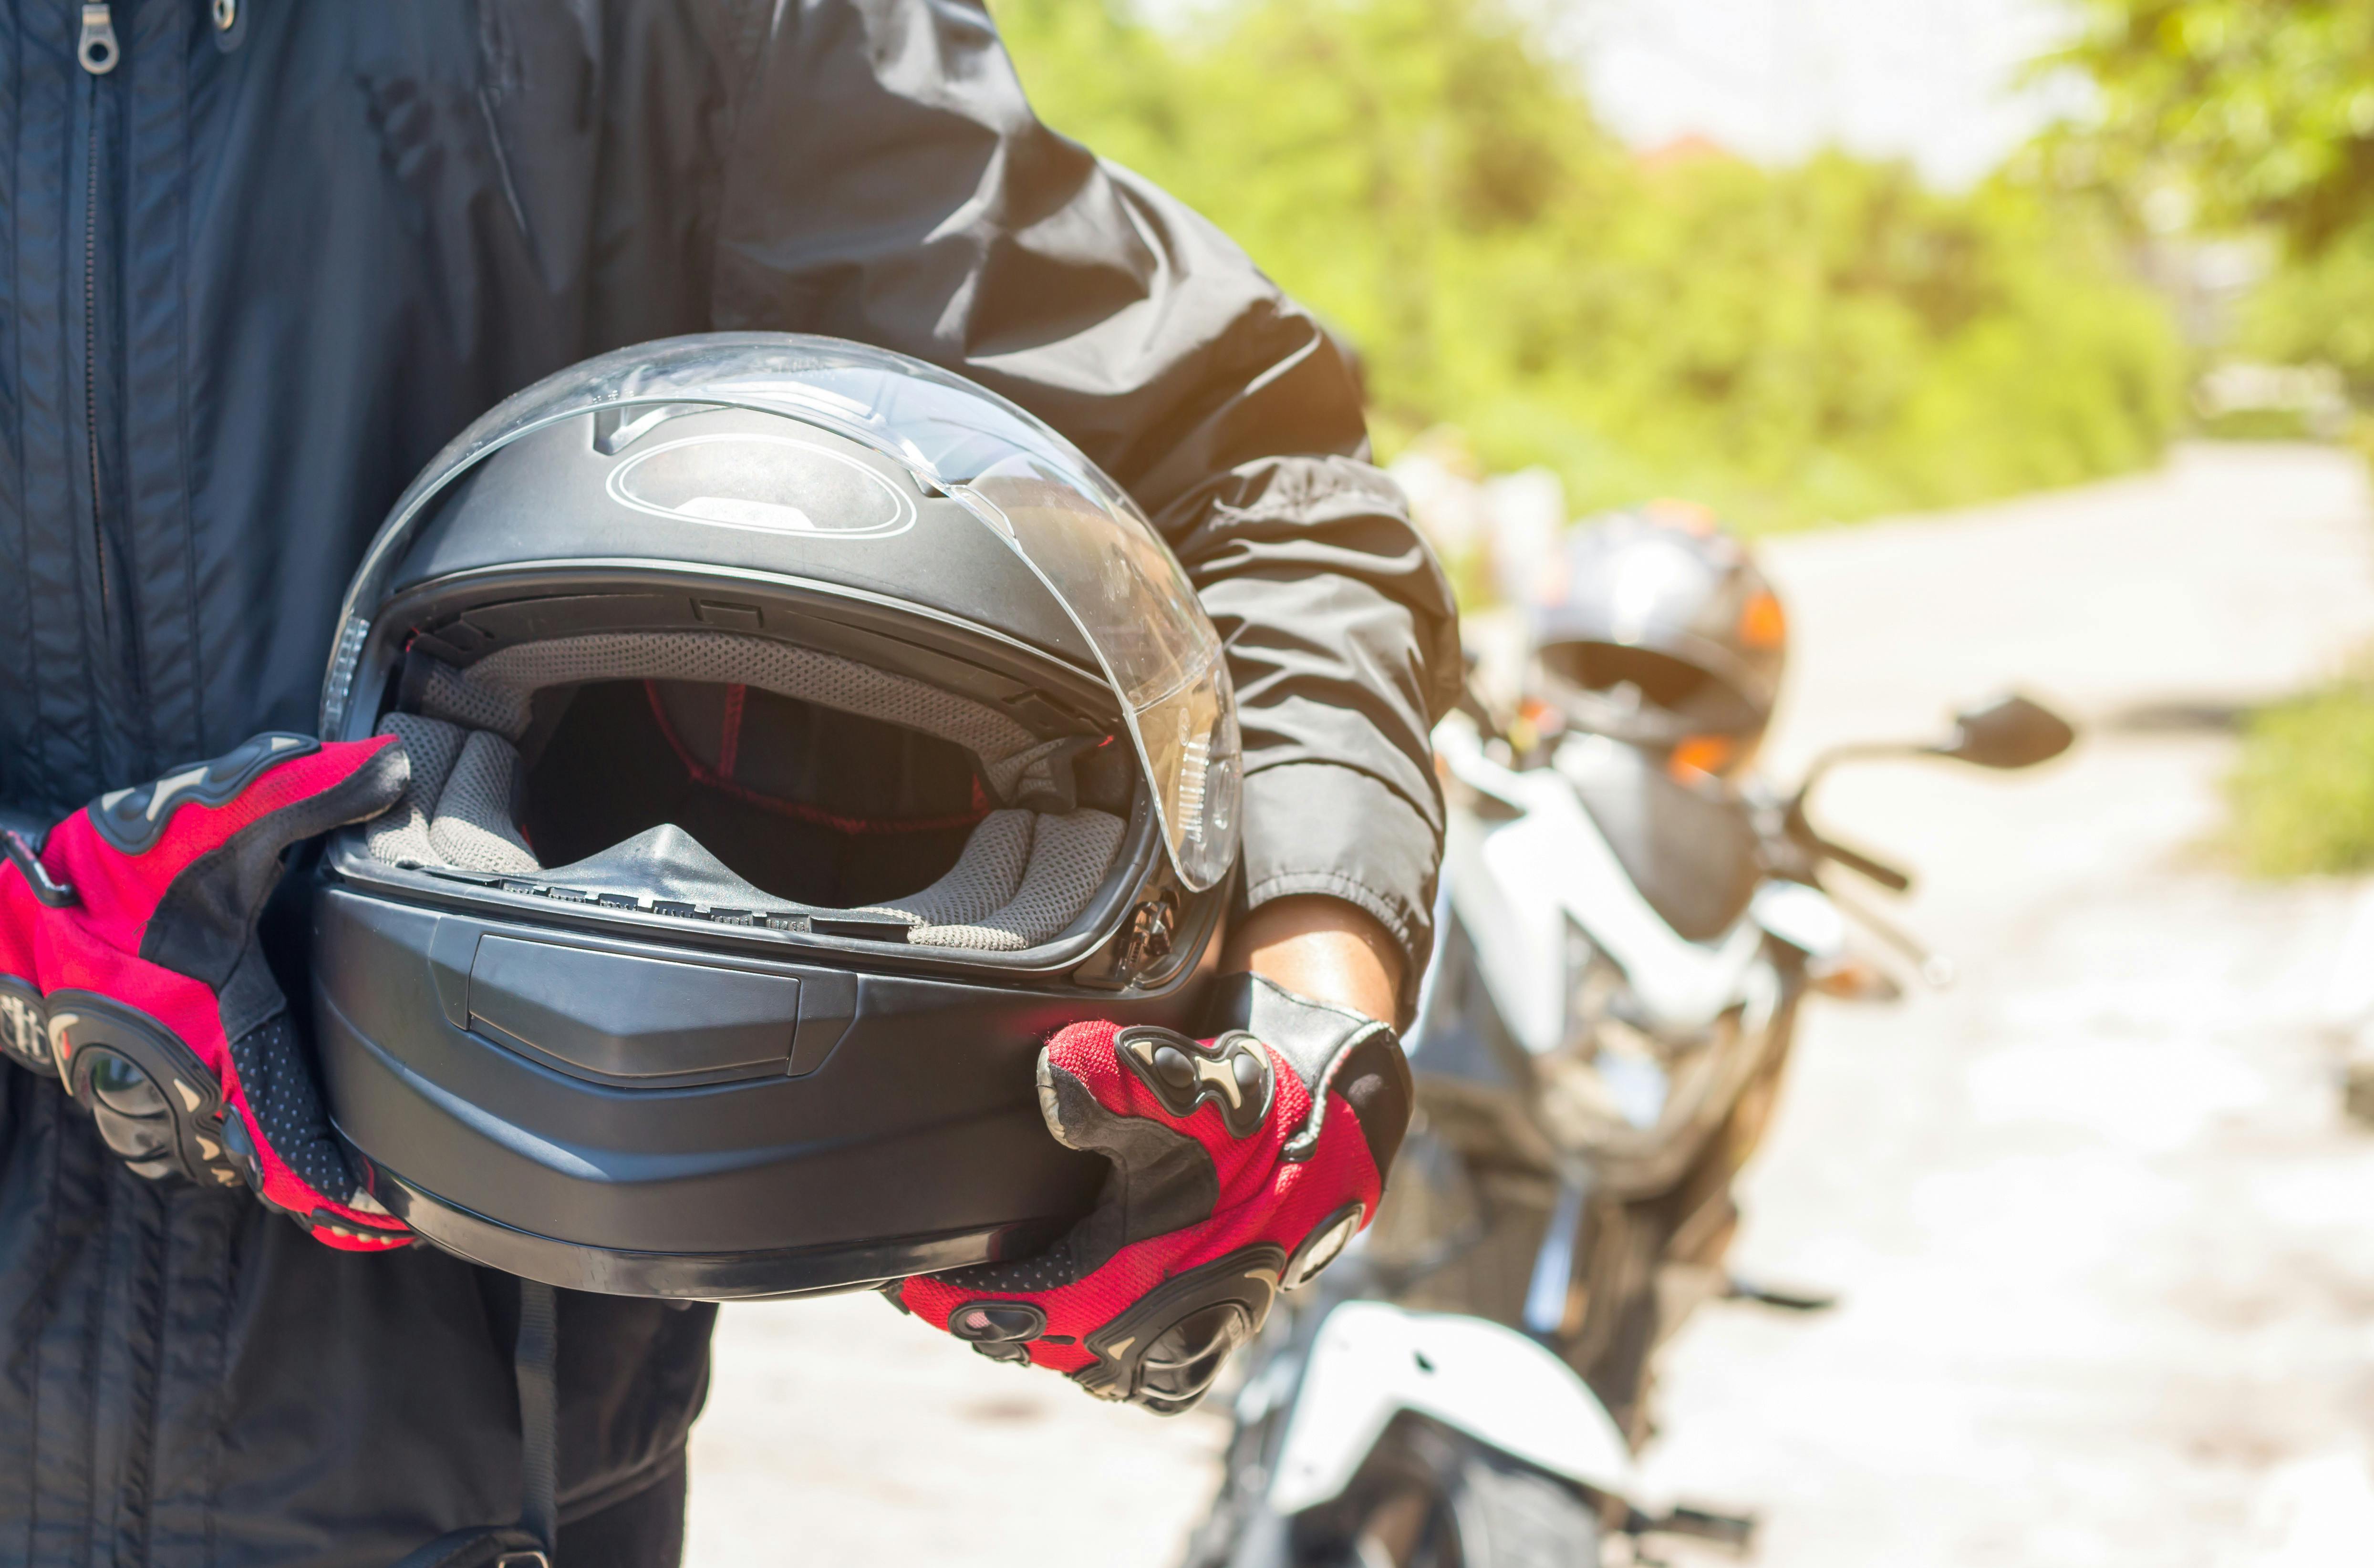 how to prevent damage to your motorcycle when you rent it; image of motorcycle rider with helmet